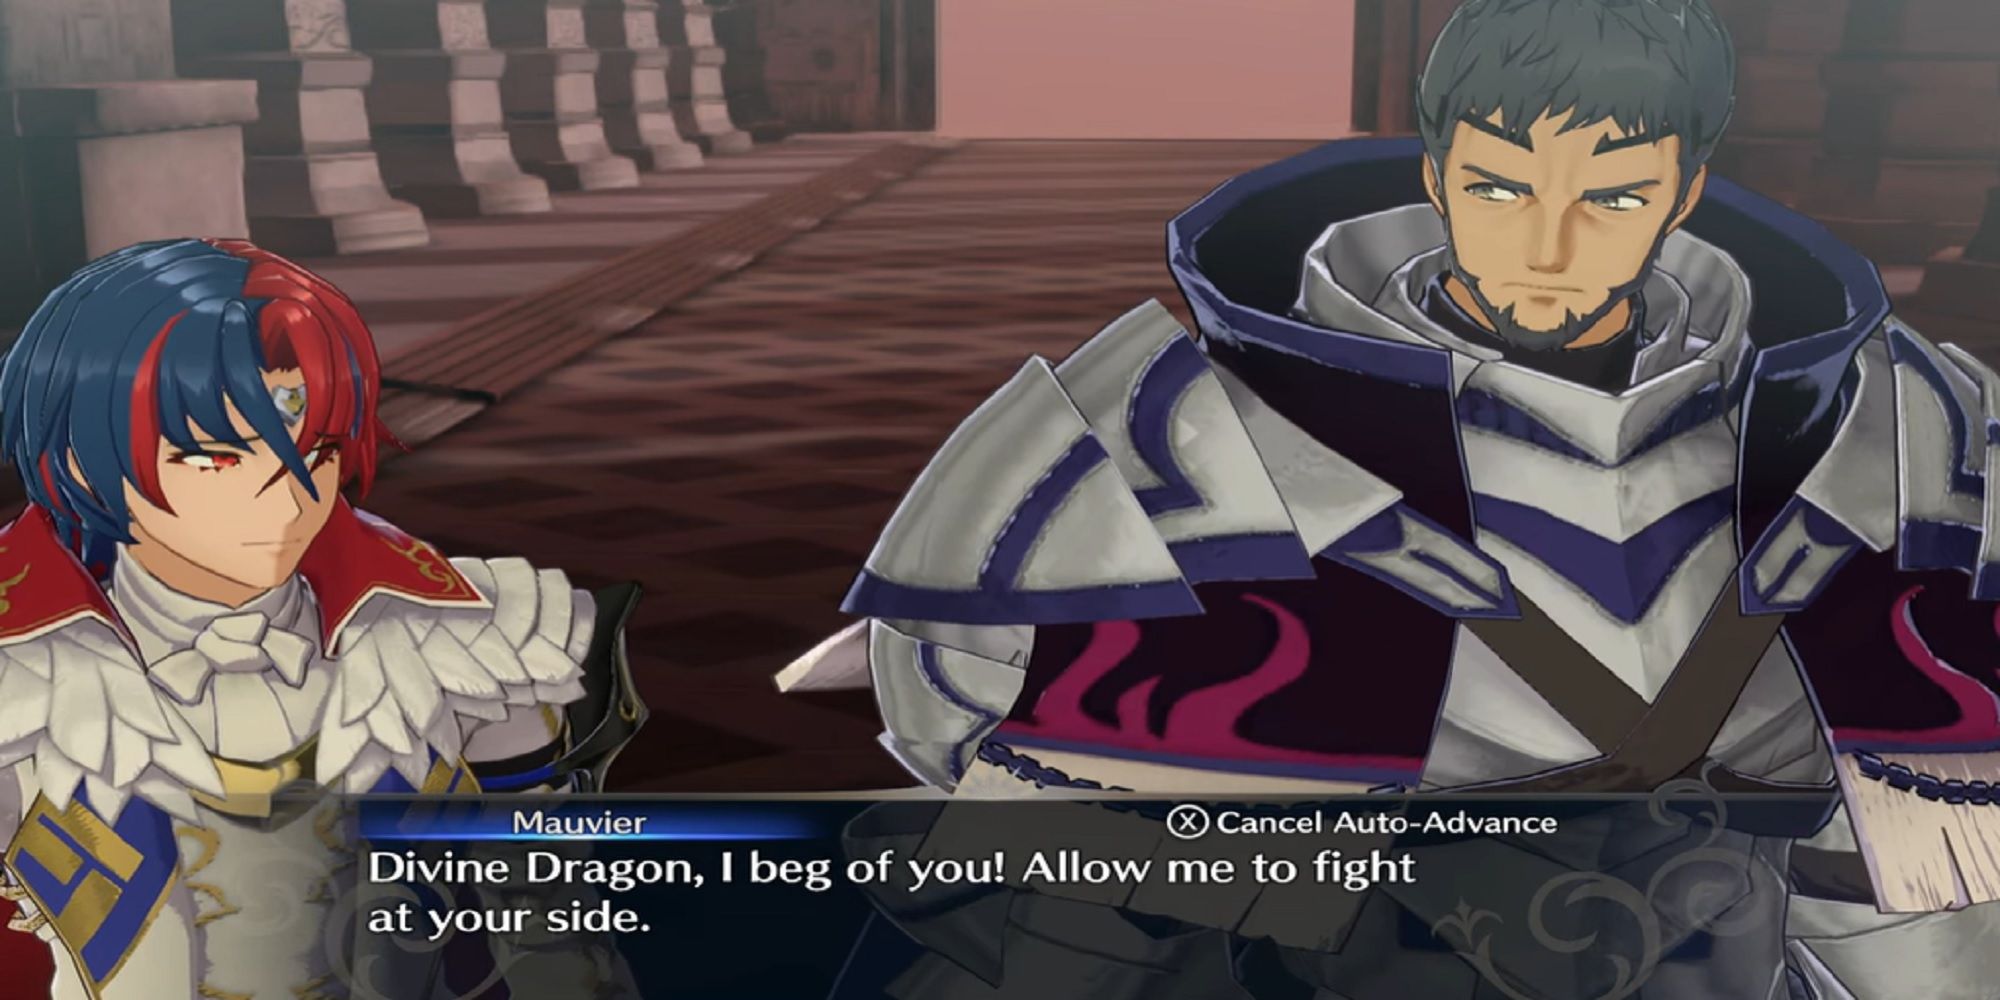 Fire Emblem Engage Mauvier dialogue in Chapter 21